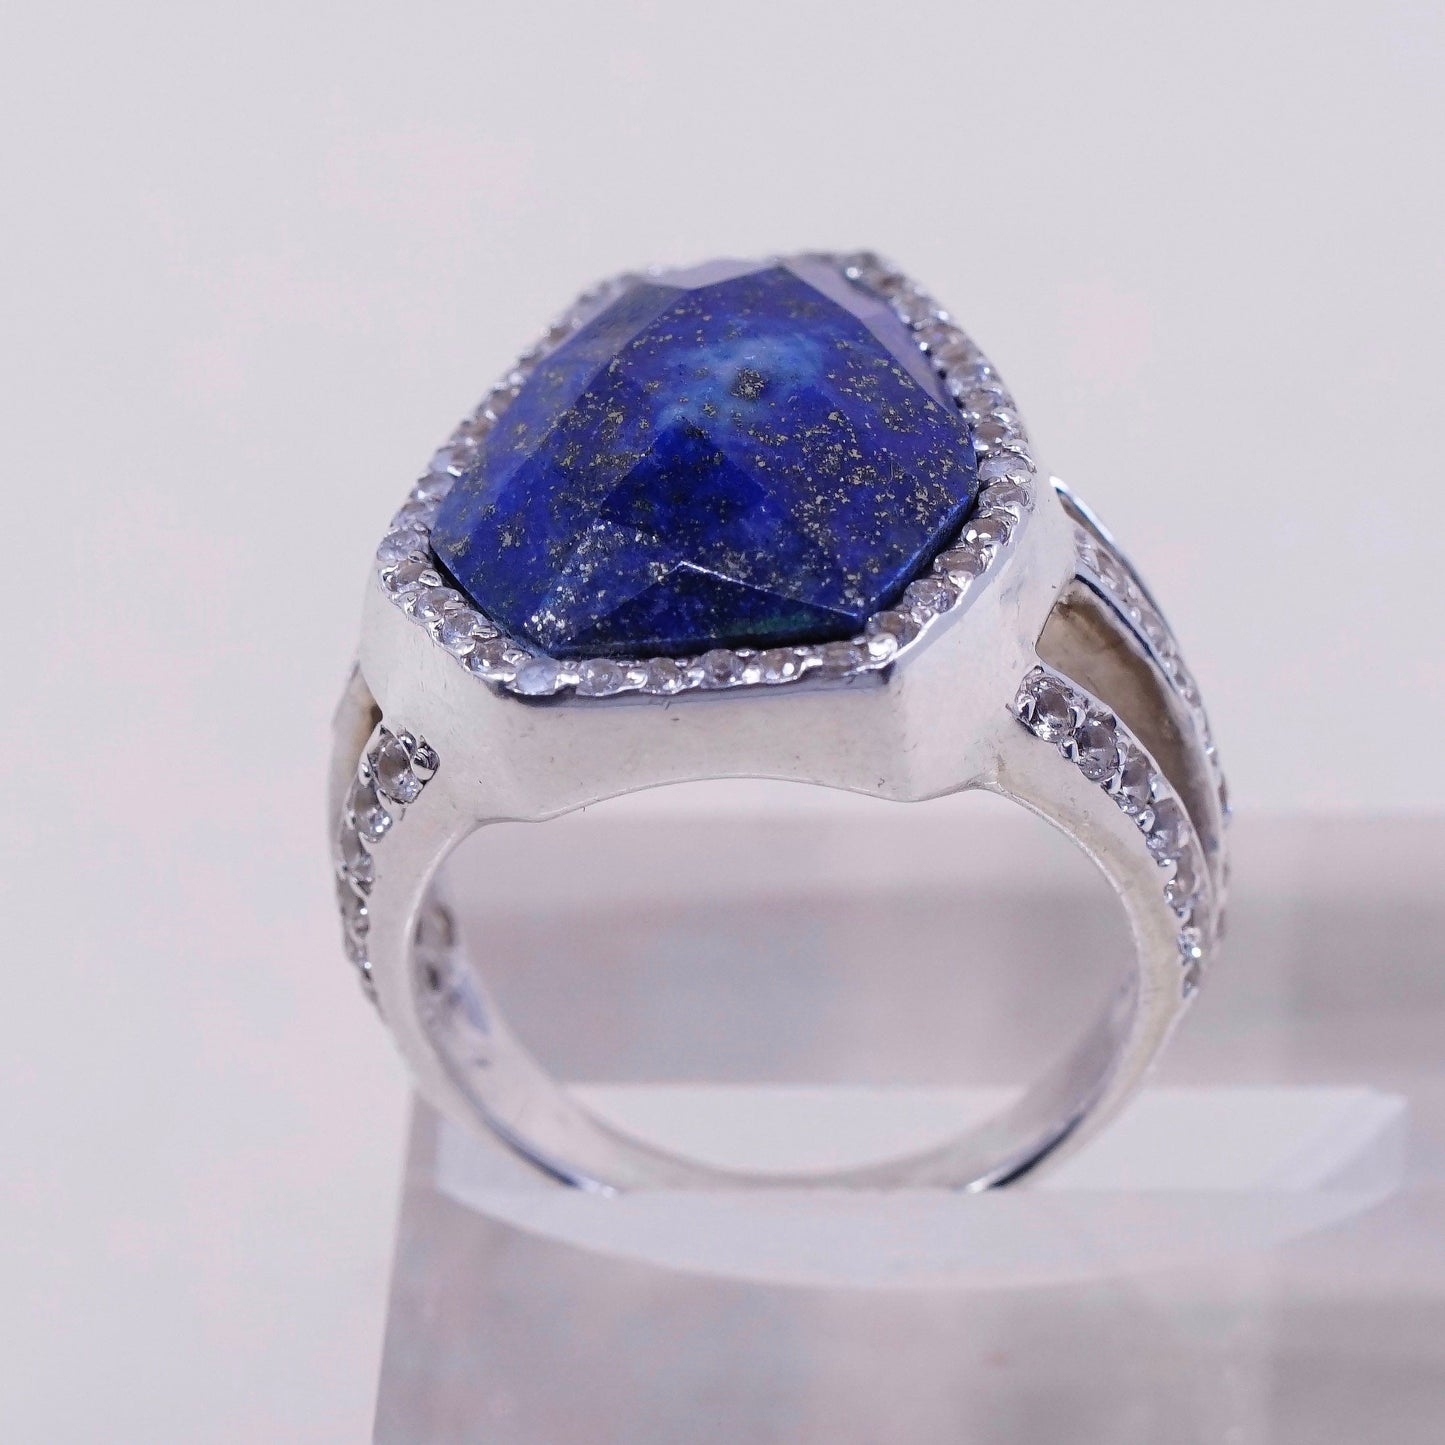 Size 10, vtg sterling 925 silver handmade ring with Lapis lazuli and Cz around